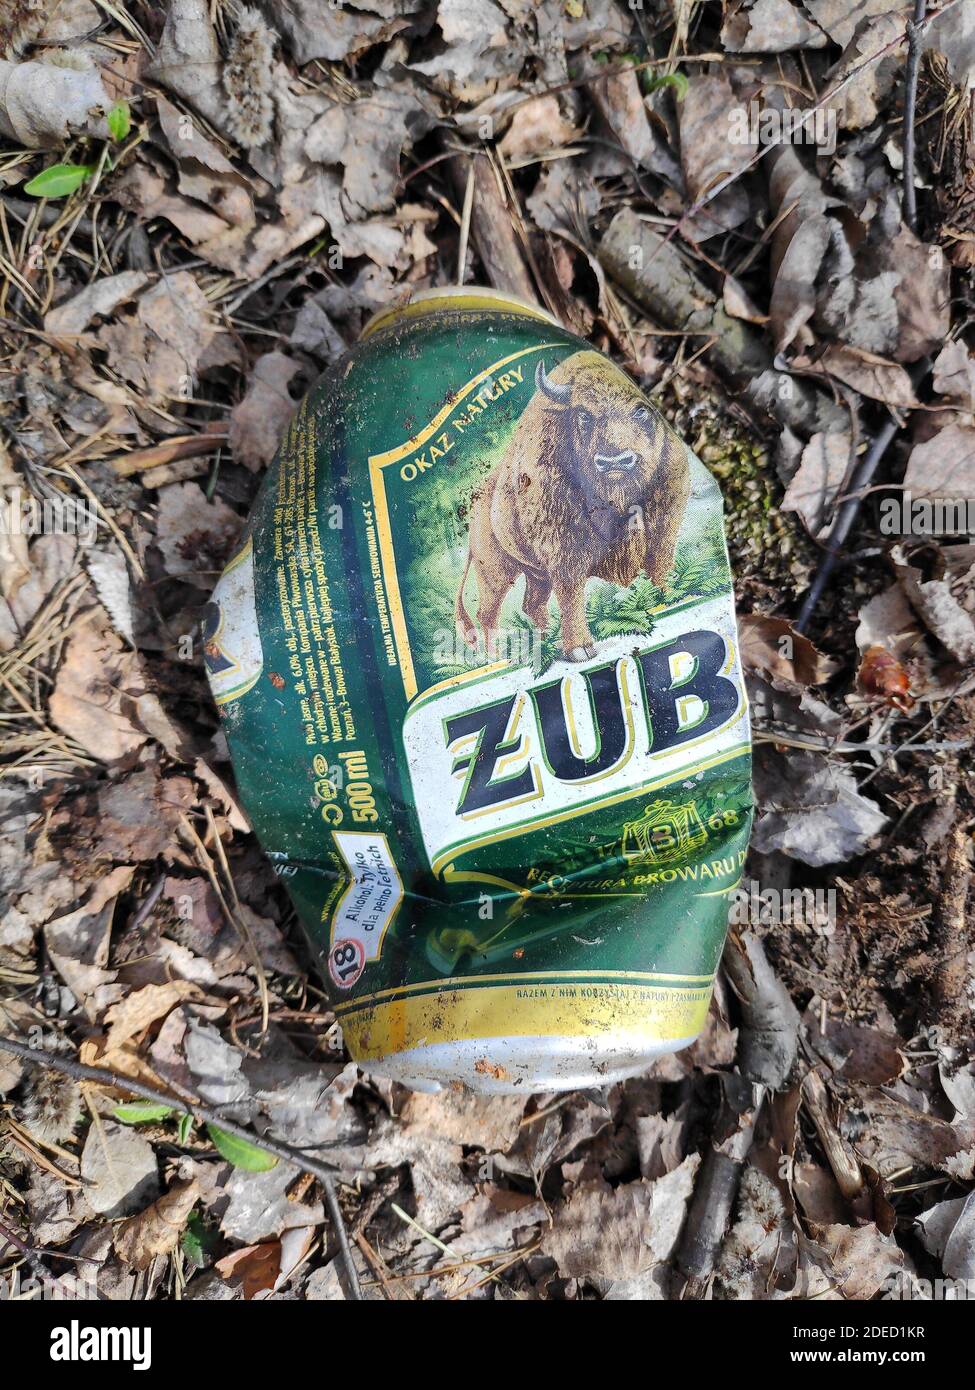 KATOWICE, POLAND - APRIL 4, 2020: Zubr beer metal can dumped illegally in a forest near Katowice, Silesia region, Poland. Stock Photo